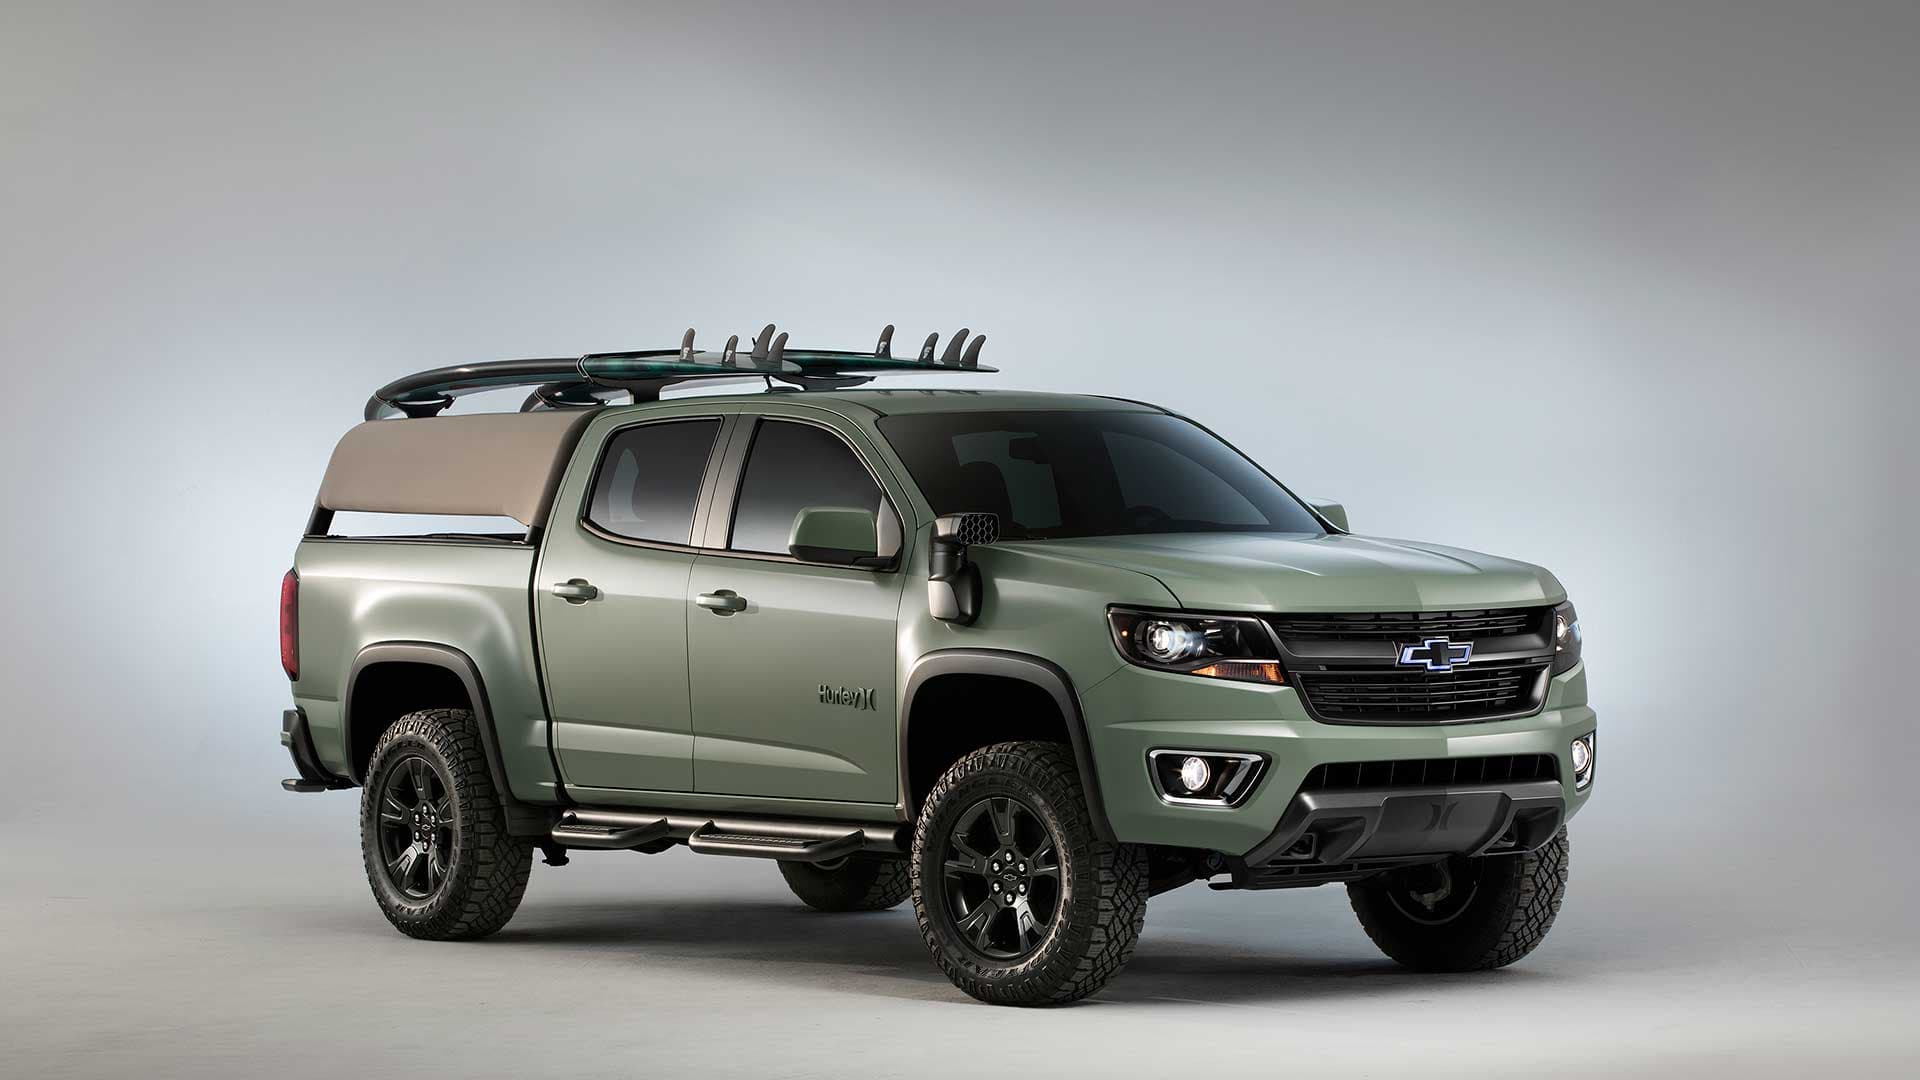 Chevy Builds the Ultimate Surf Truck and Volkswagen Leaves WRC: The Evening Rush